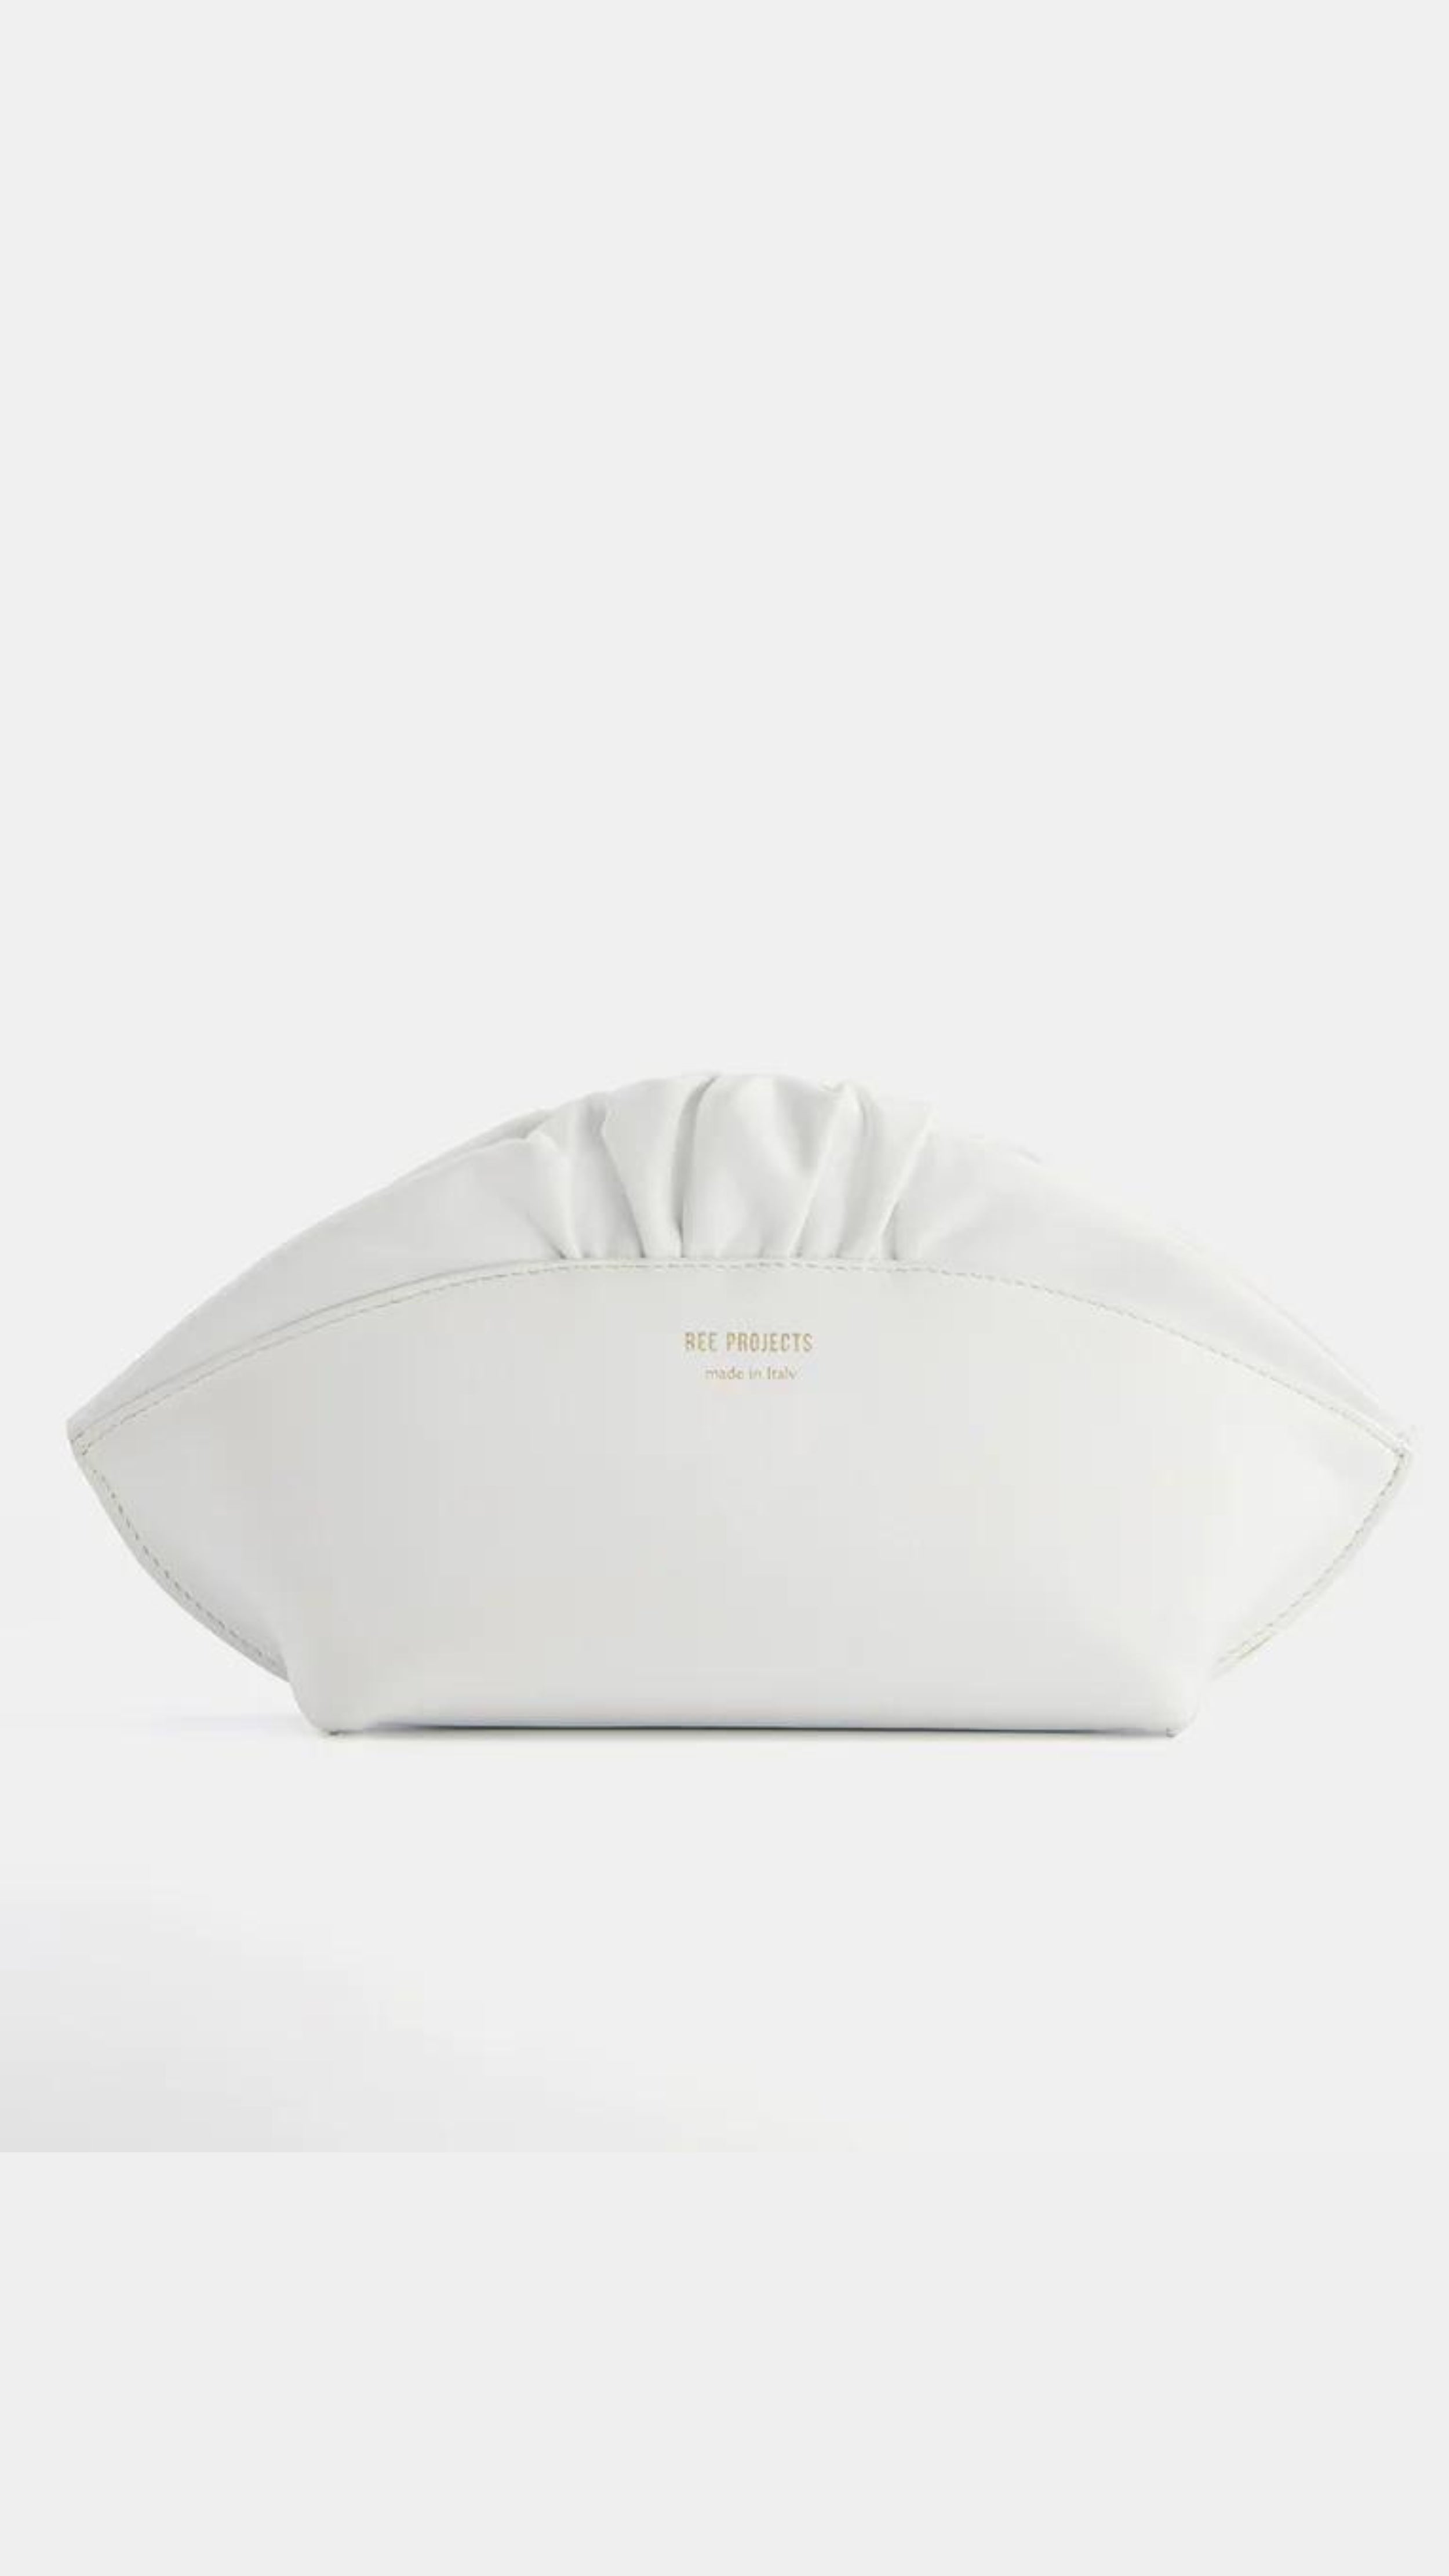 Ree Projects, Ann Baguettina in White. Made in the softest Italian leather this clutch style is perfect for any occasion. It has a slim curved top that is finished with a delicate ruffle and gold hardware. It features a strong magnetic closure and has internal straps to allow it to convert to a shoulder or crossbody bag.  Shown from the front in clutch bag style.